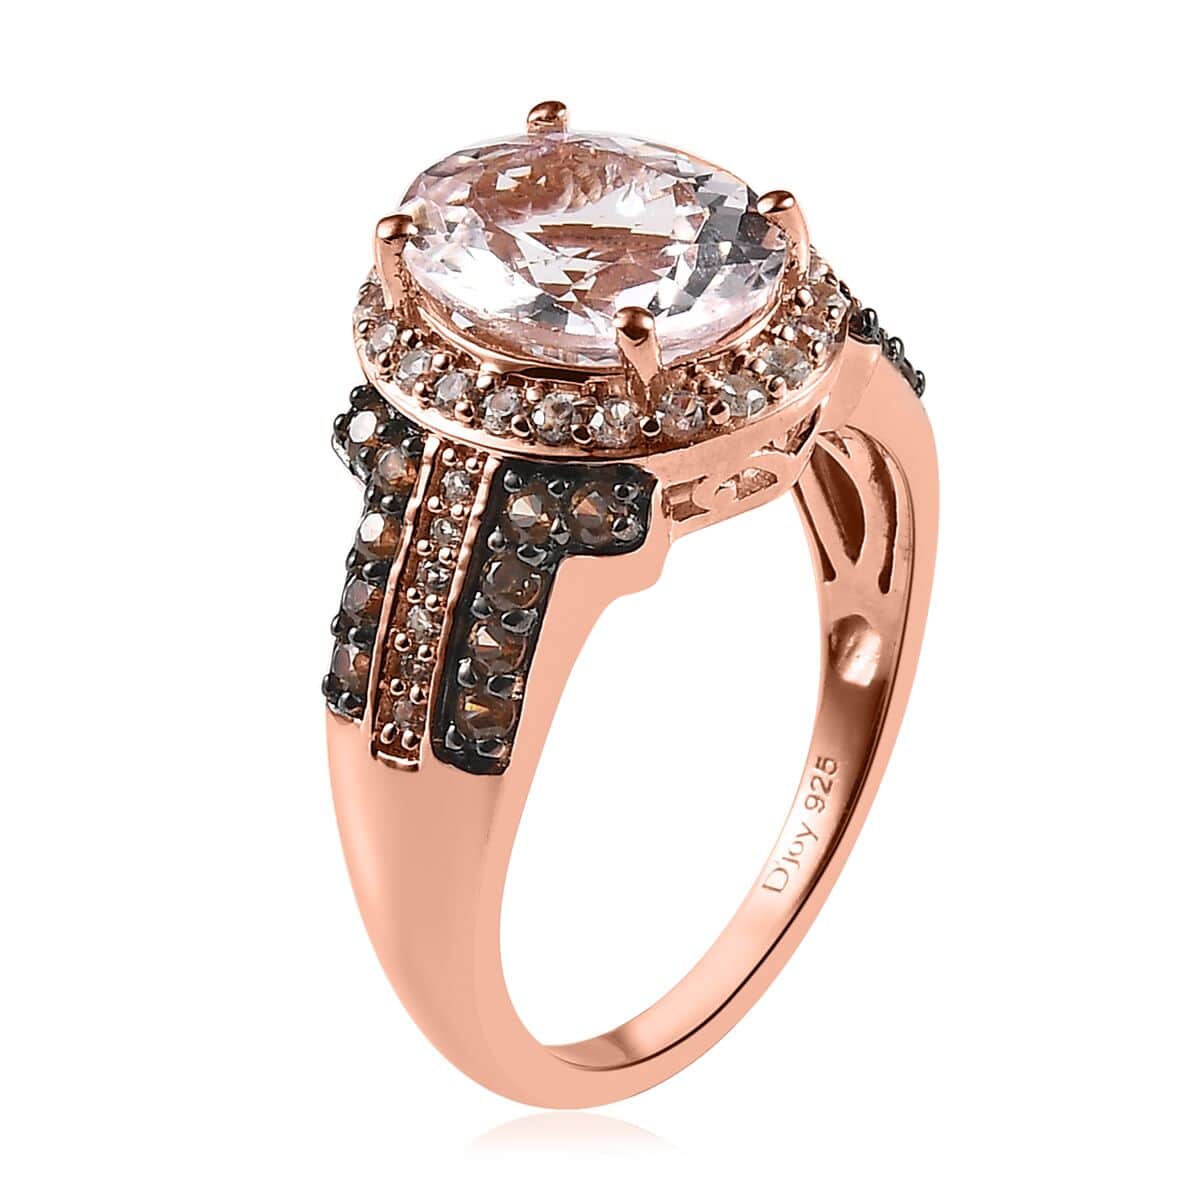 Pink Morganite, Champagne and White Zircon Ring in Vermeil Rose Gold Over Sterling Silver 3.15 ctw (Del. in 5-7 Days) image number 3